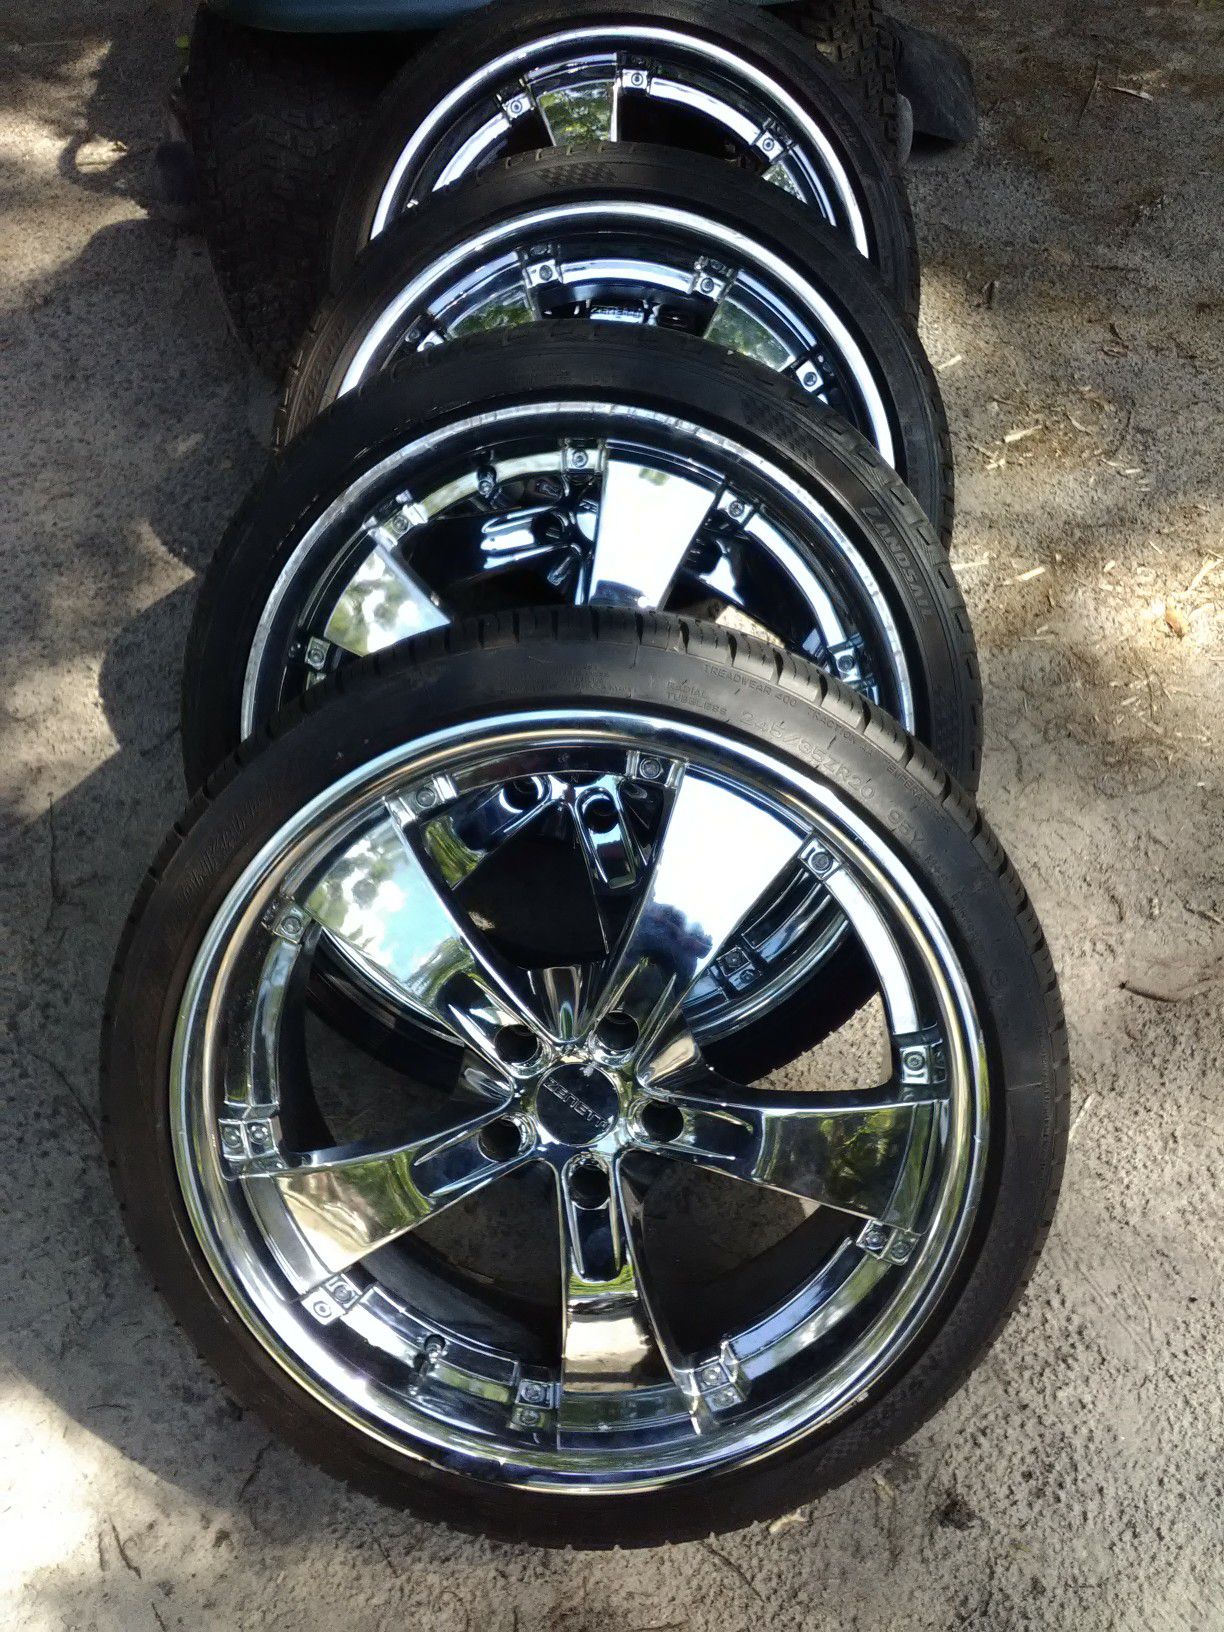 20s wheels and tires